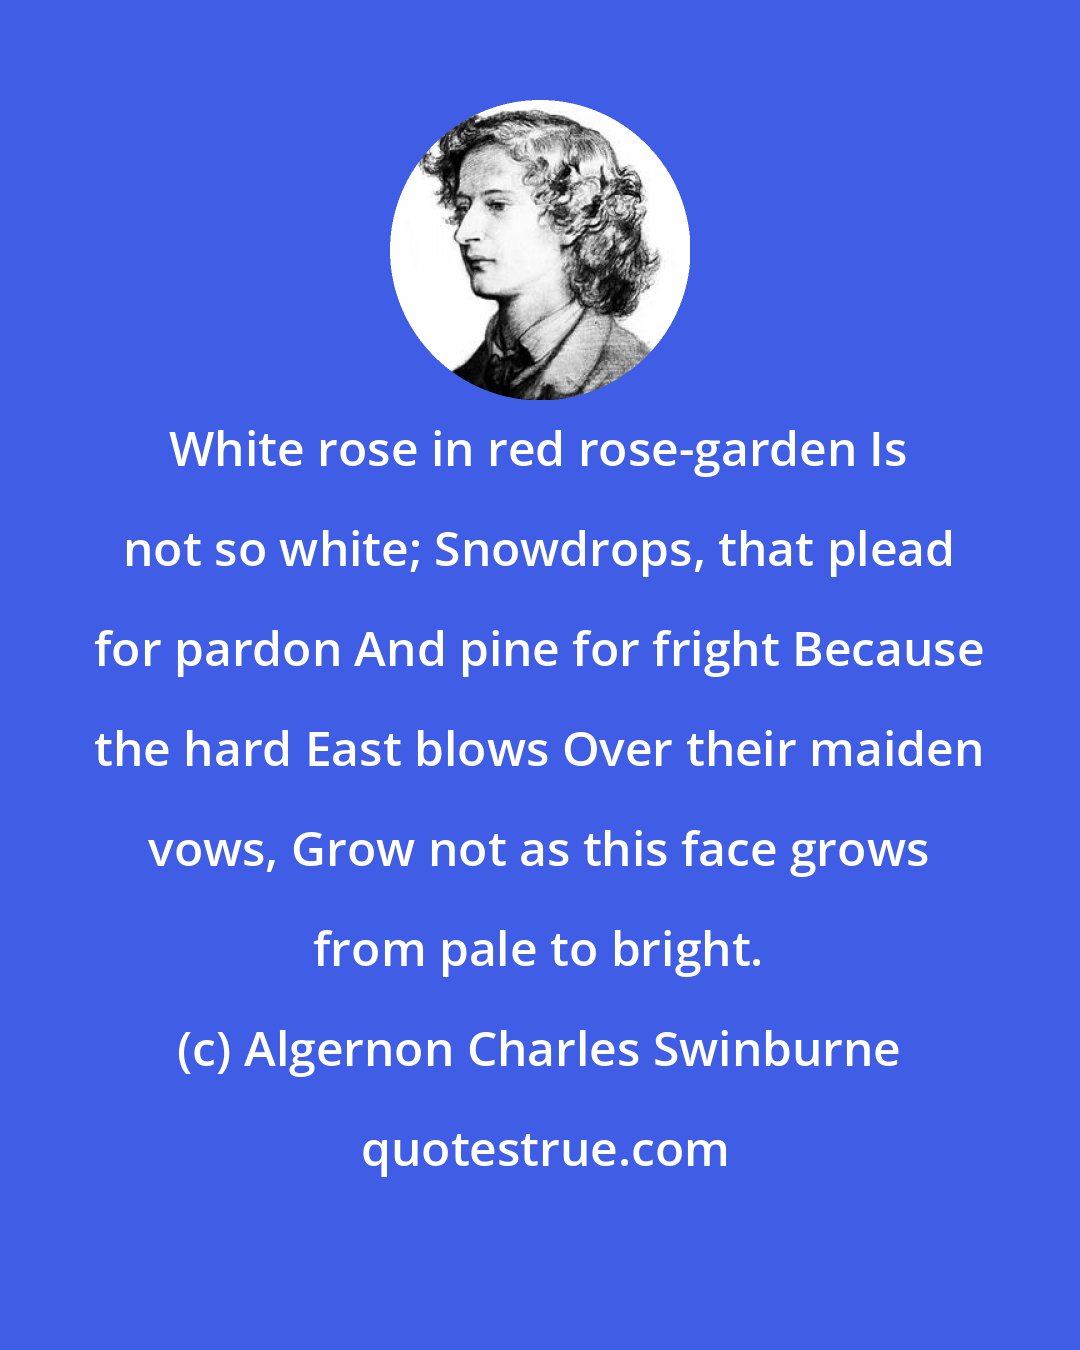 Algernon Charles Swinburne: White rose in red rose-garden Is not so white; Snowdrops, that plead for pardon And pine for fright Because the hard East blows Over their maiden vows, Grow not as this face grows from pale to bright.